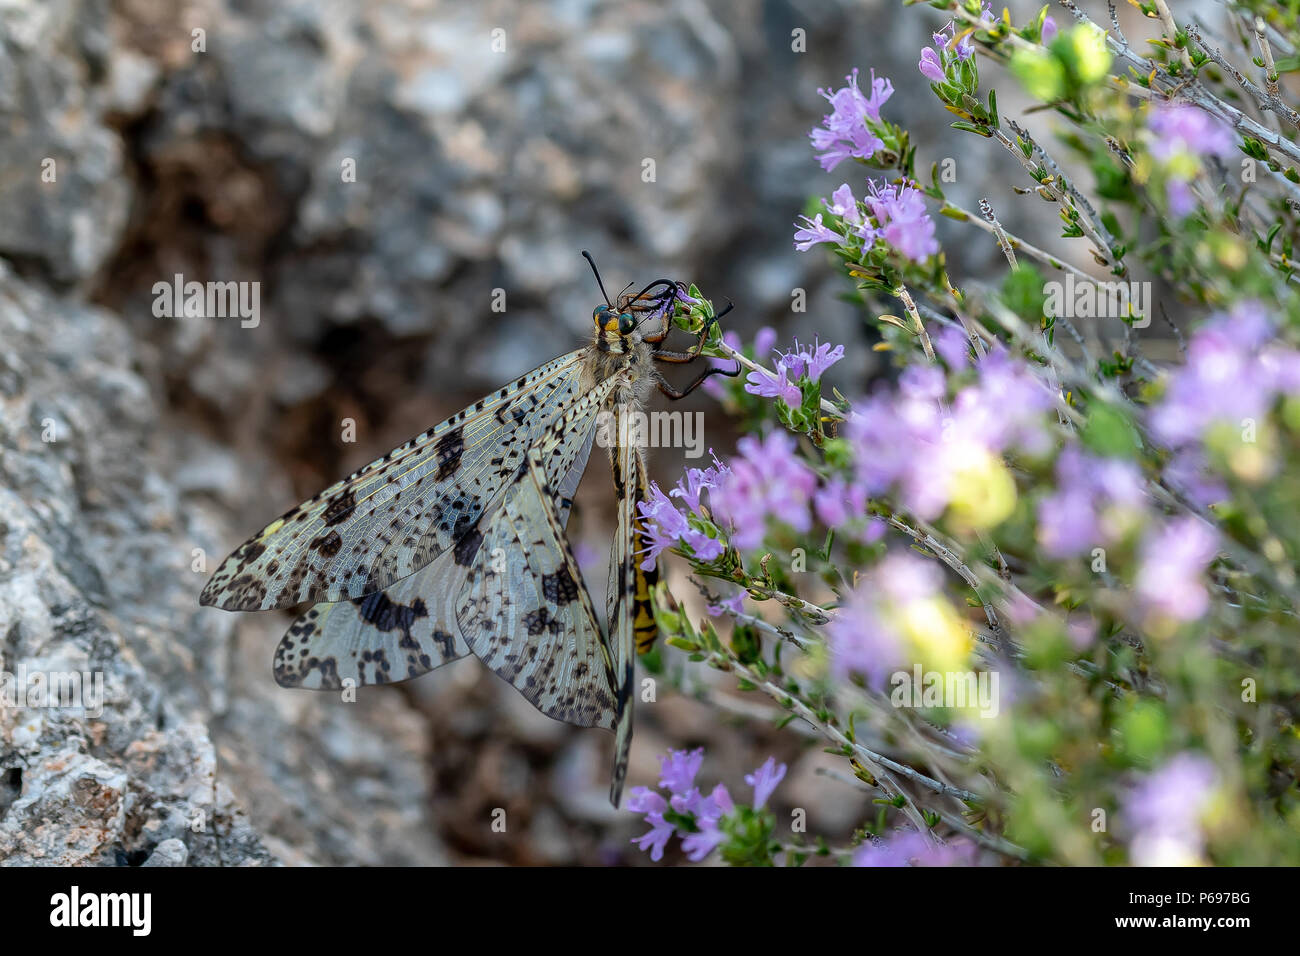 An adult antlion feeds on a wildflower on a hill side in Greece Stock Photo